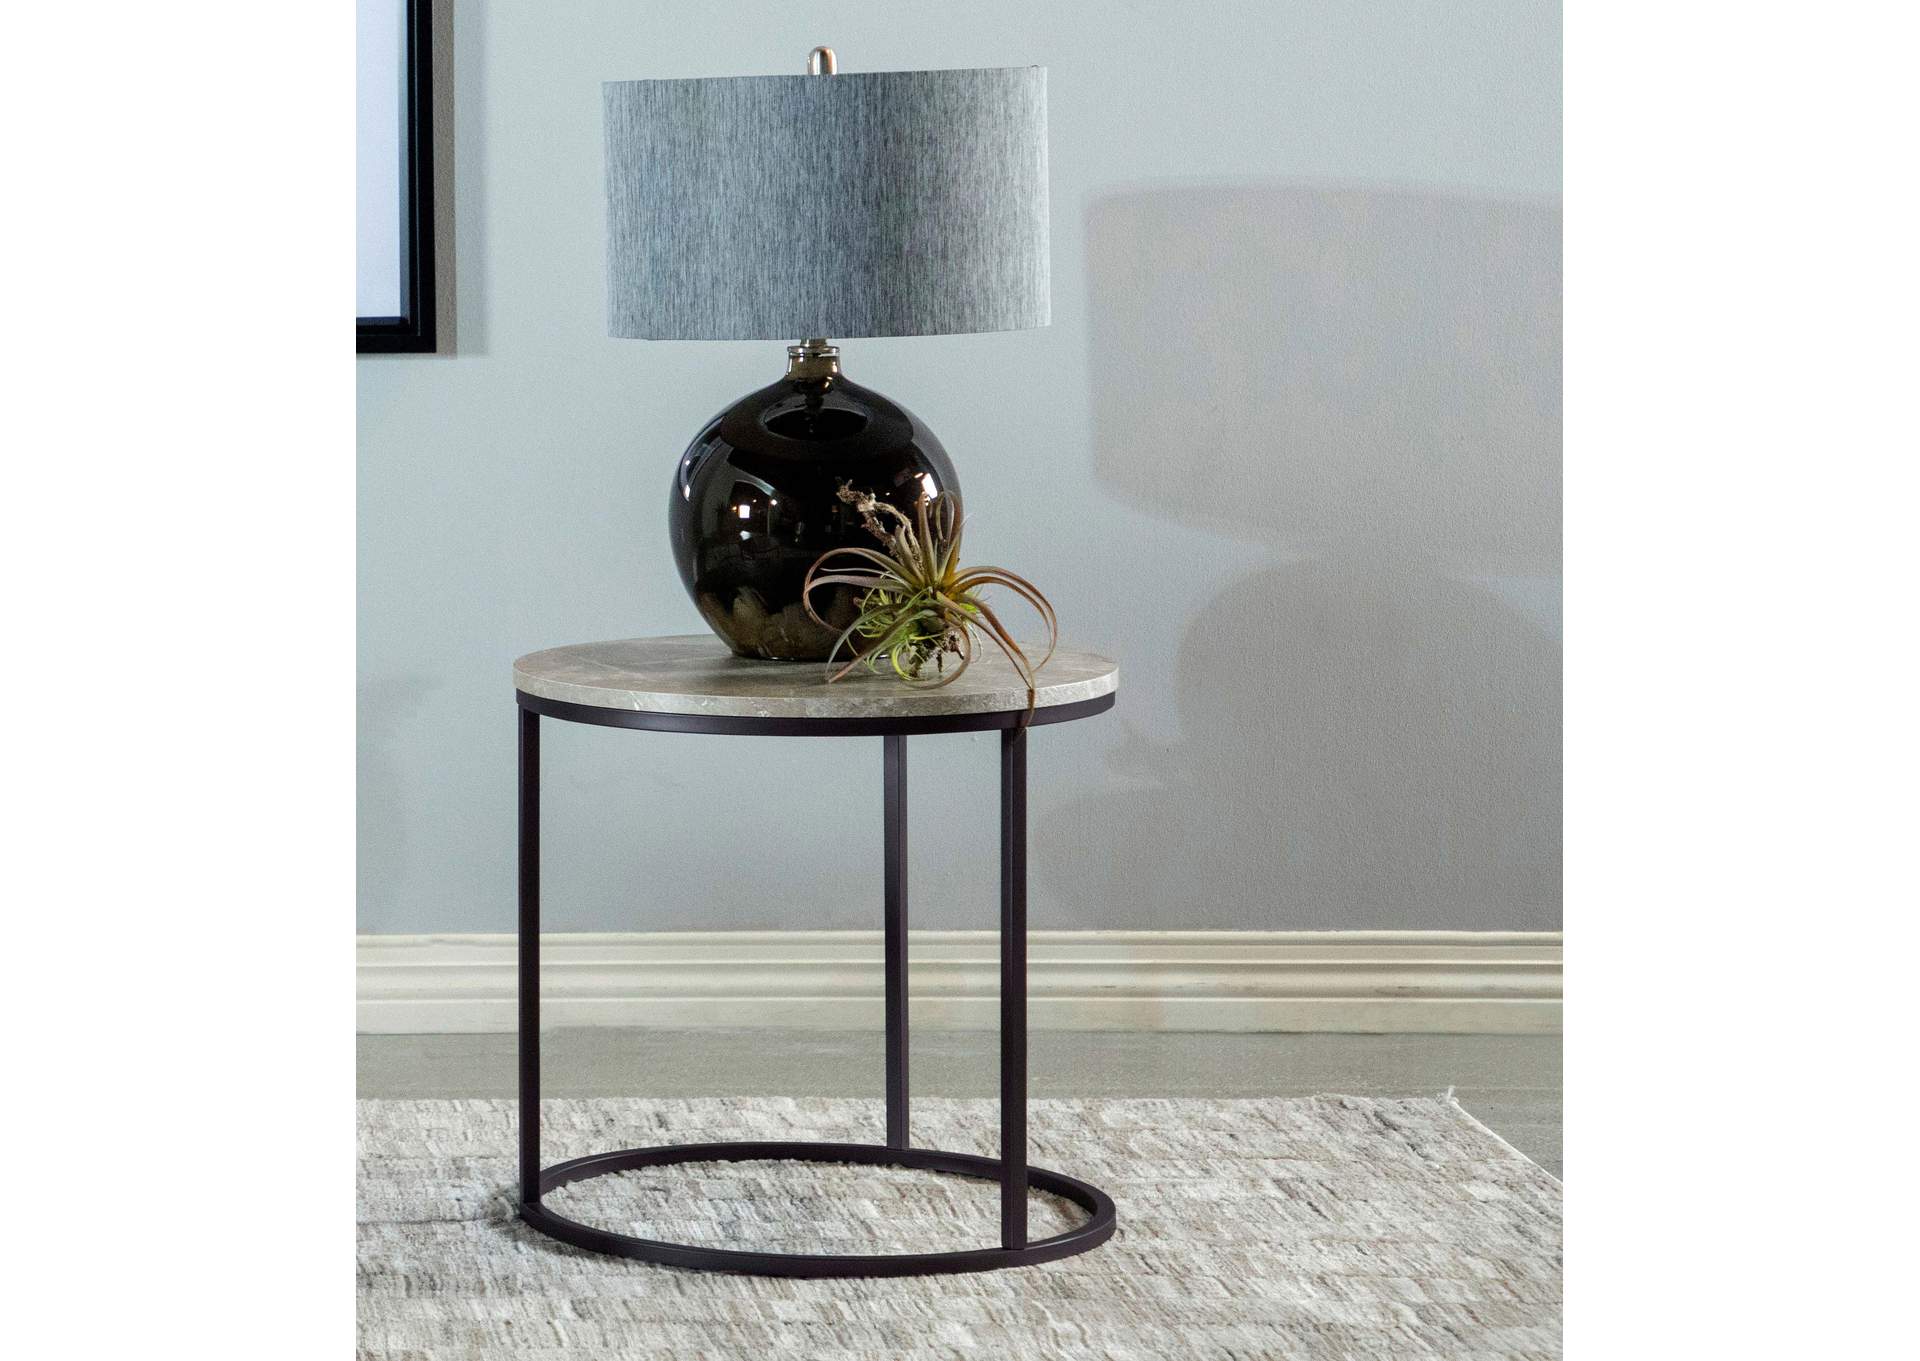 Lainey Faux Marble Round Top End Table Grey and Gunmetal,Coaster Furniture